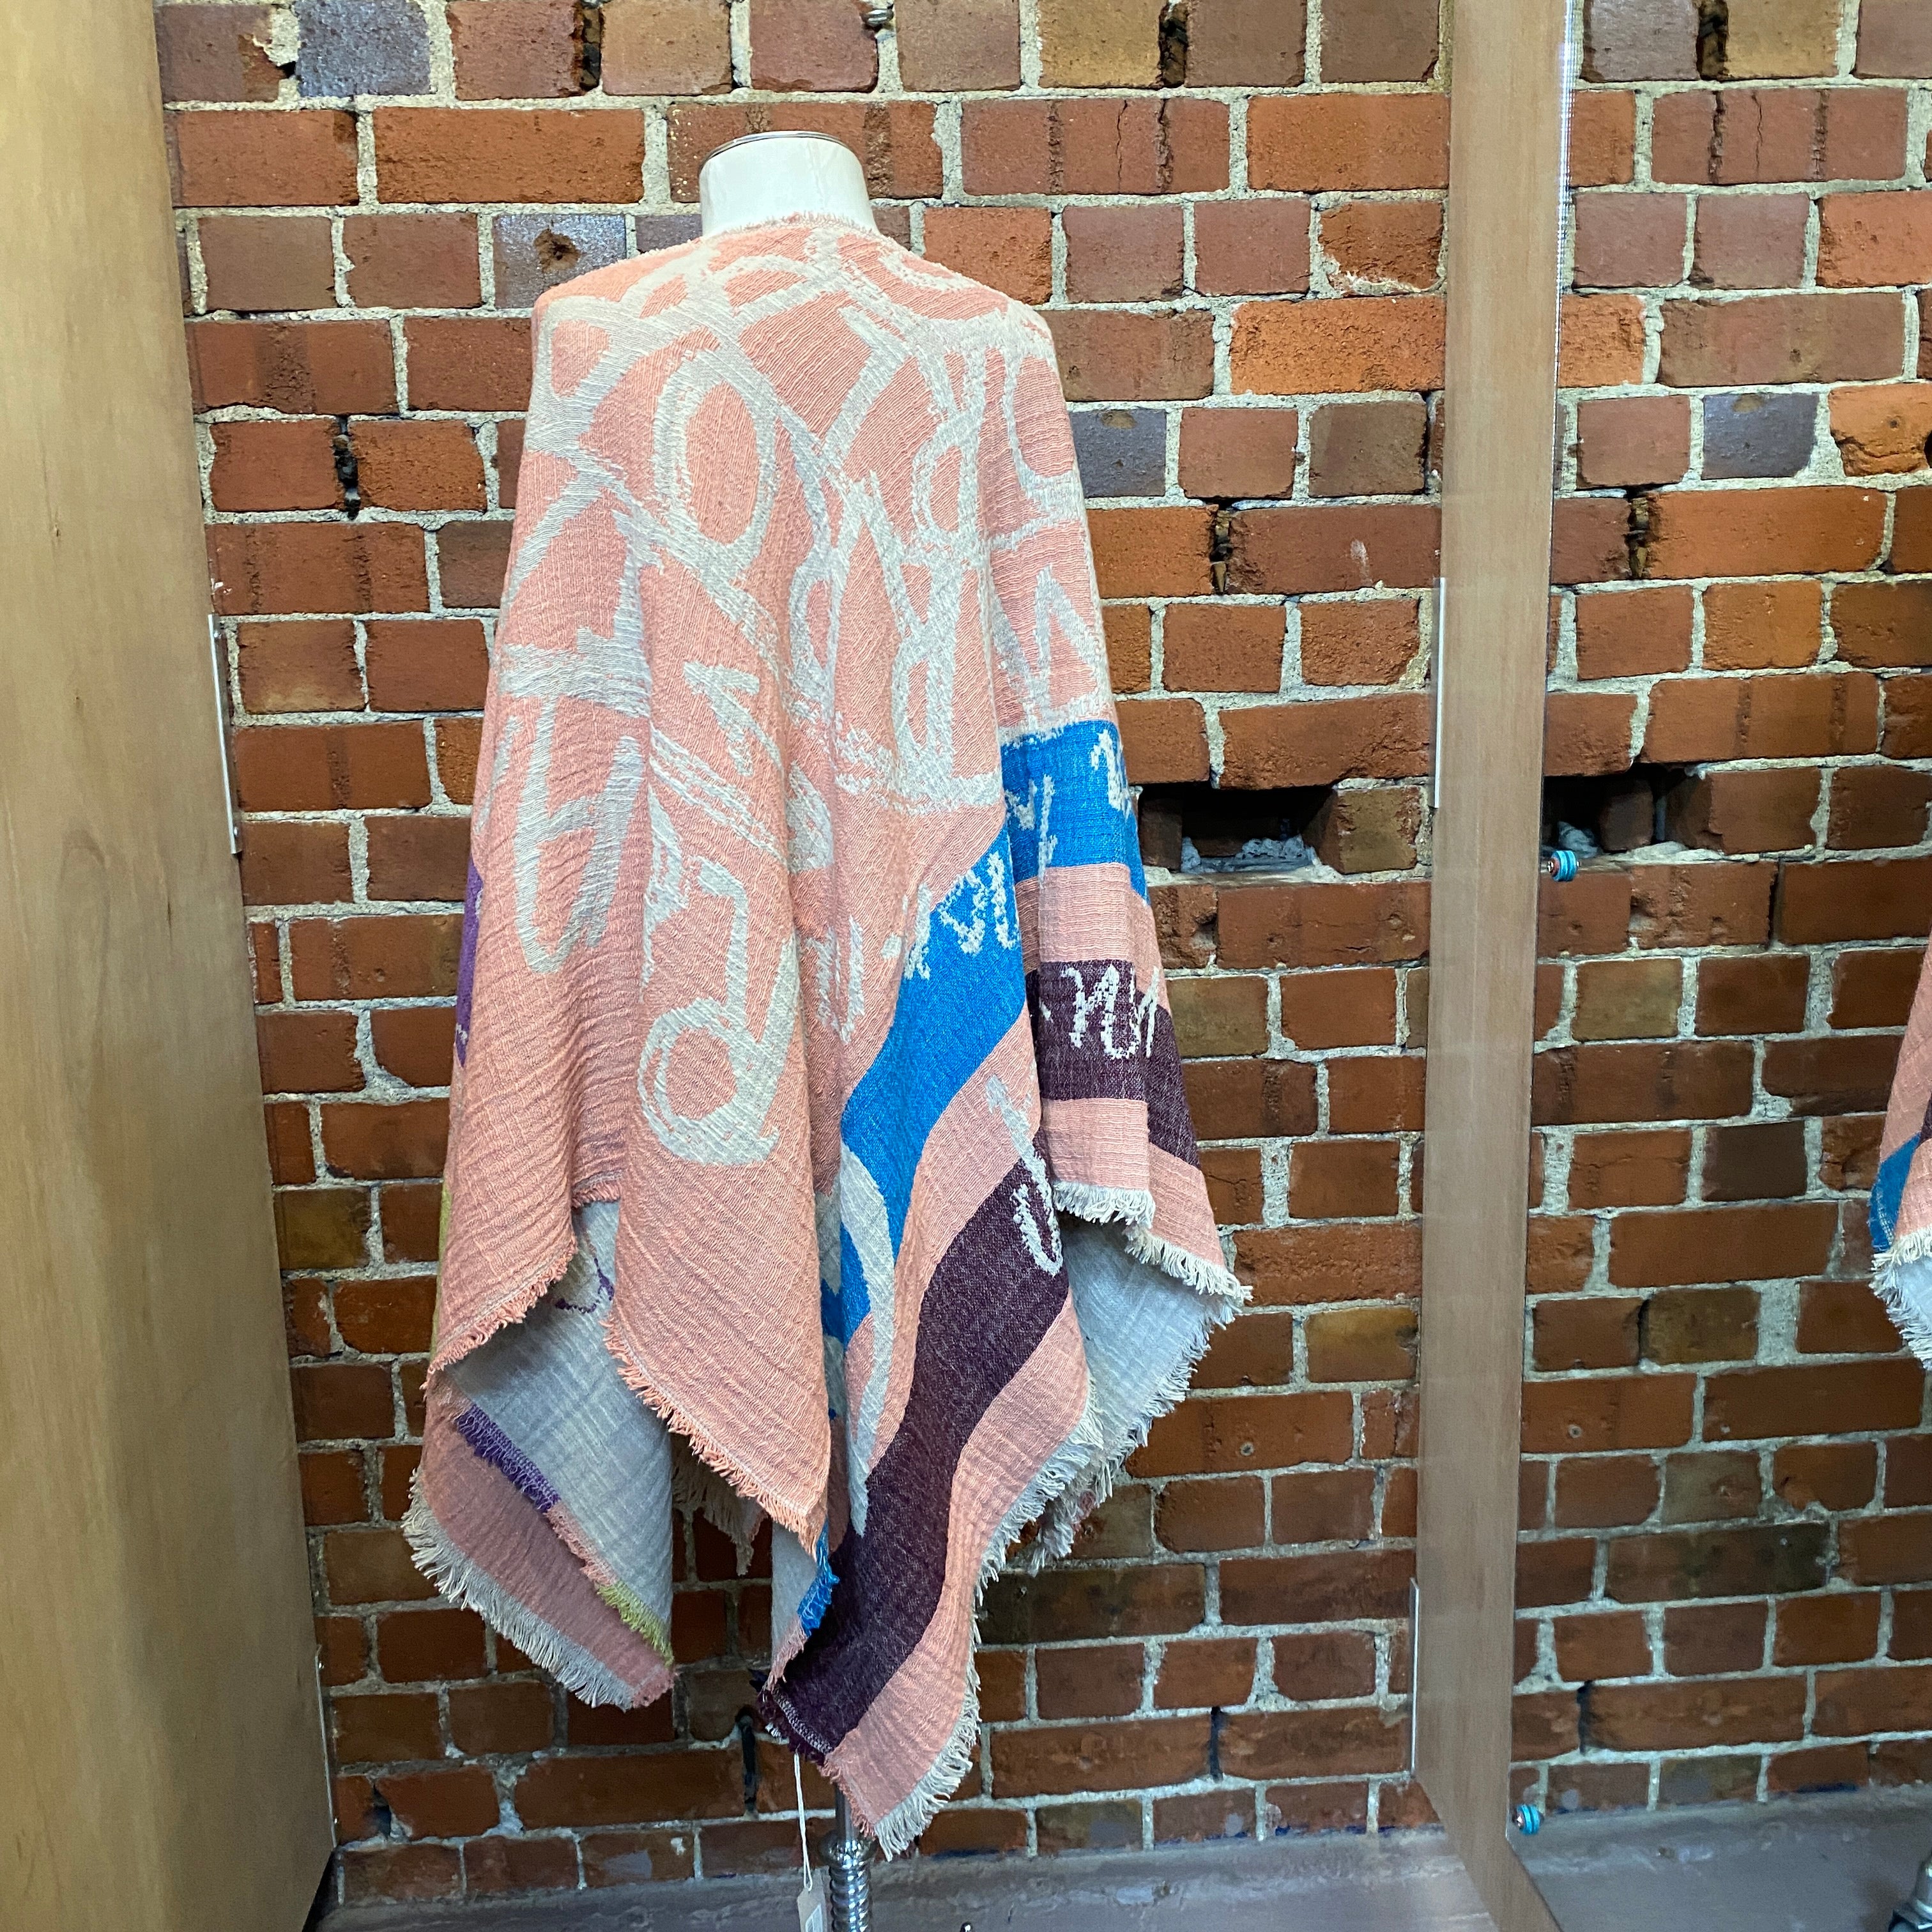 VIVIENNE WESTWOOD woven poncho